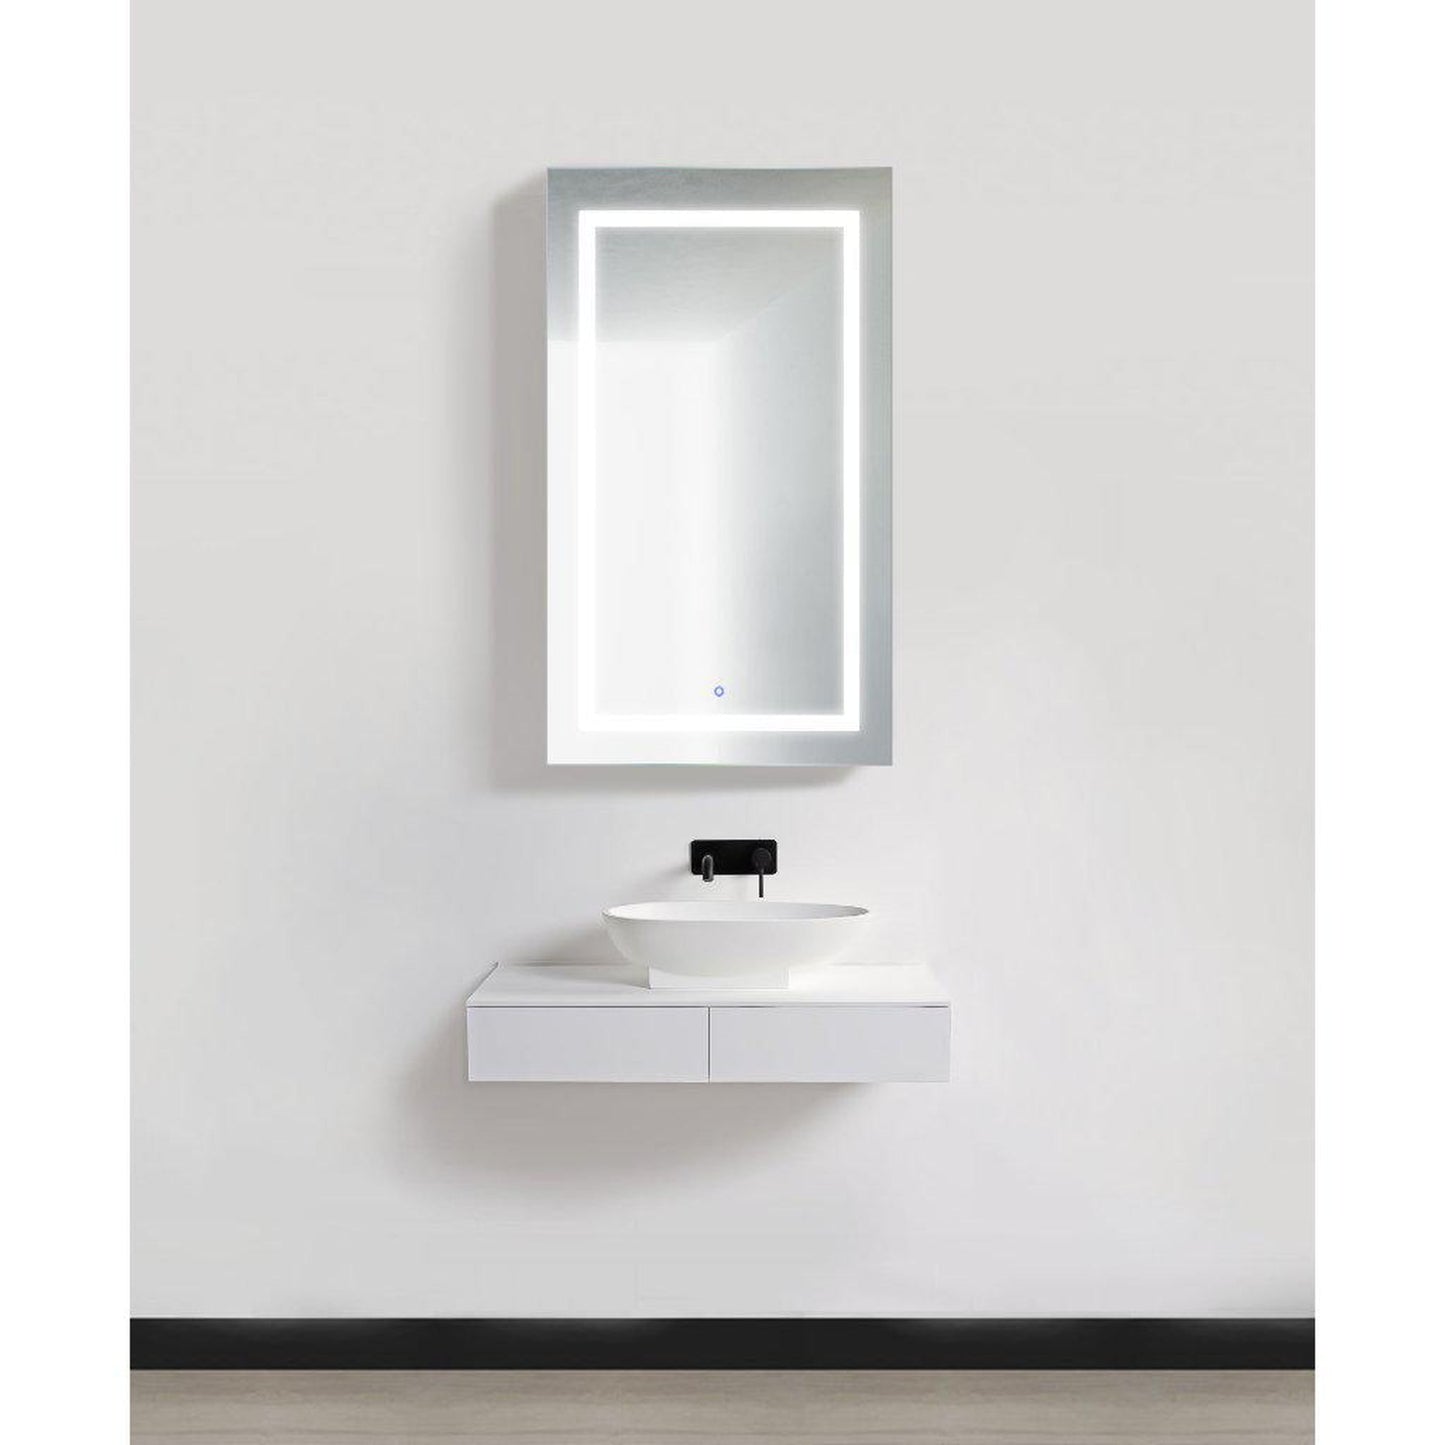 Krugg Reflections Svange 24" x 42" 5000K Single Left Opening Rectangular Recessed/Surface-Mount Illuminated Silver Backed LED Medicine Cabinet Mirror With Built-in Defogger, Dimmer and Electrical Outlet